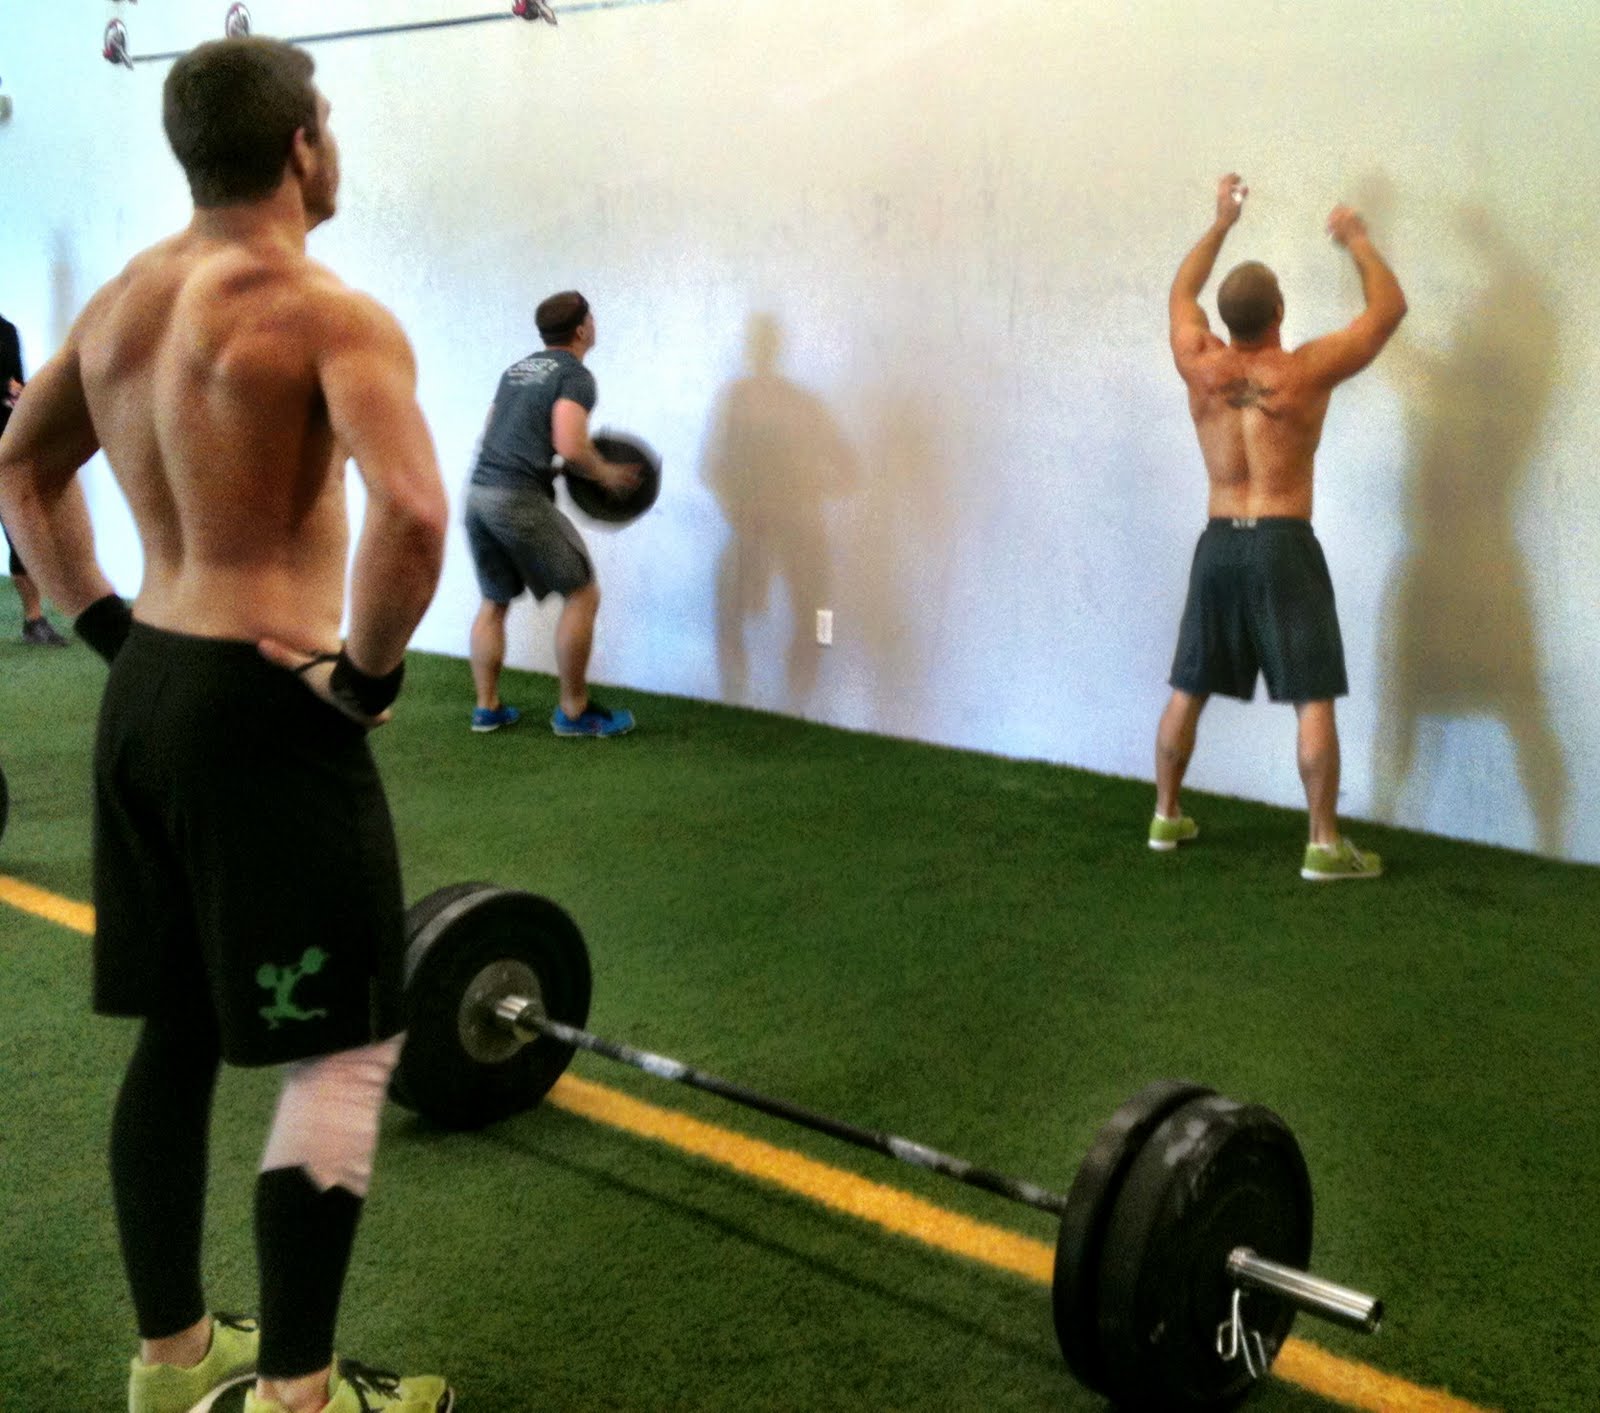 Wall balls and then a pretty heavy power clean... Only one guy can ...